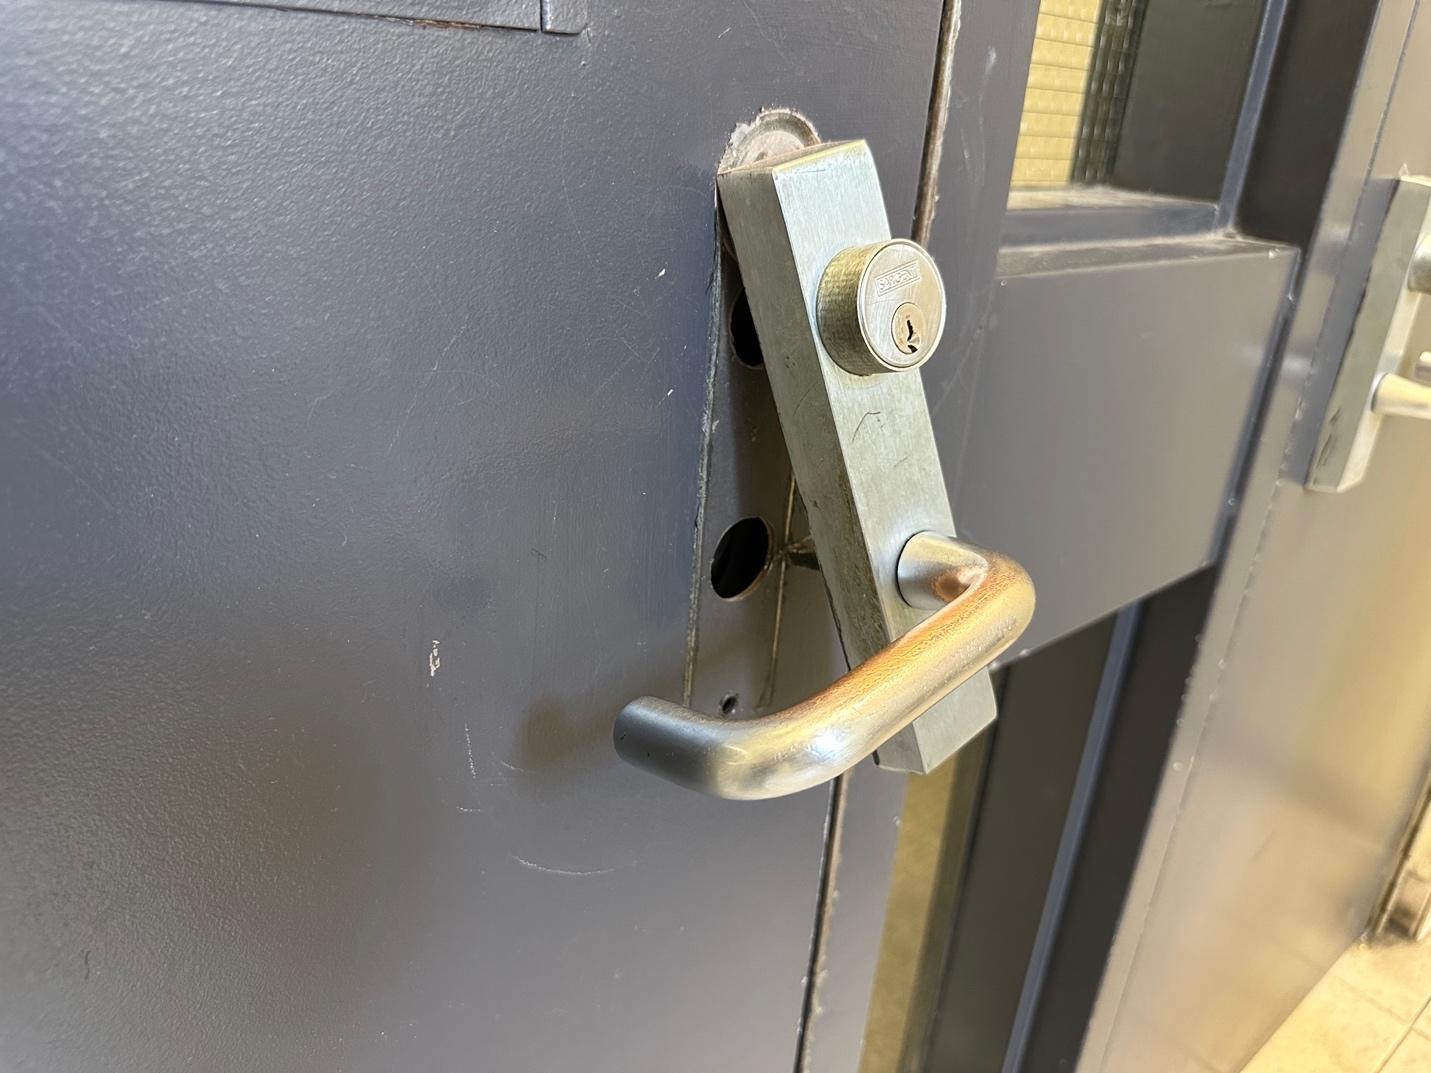 A door handle on a door

Description automatically generated with low confidence